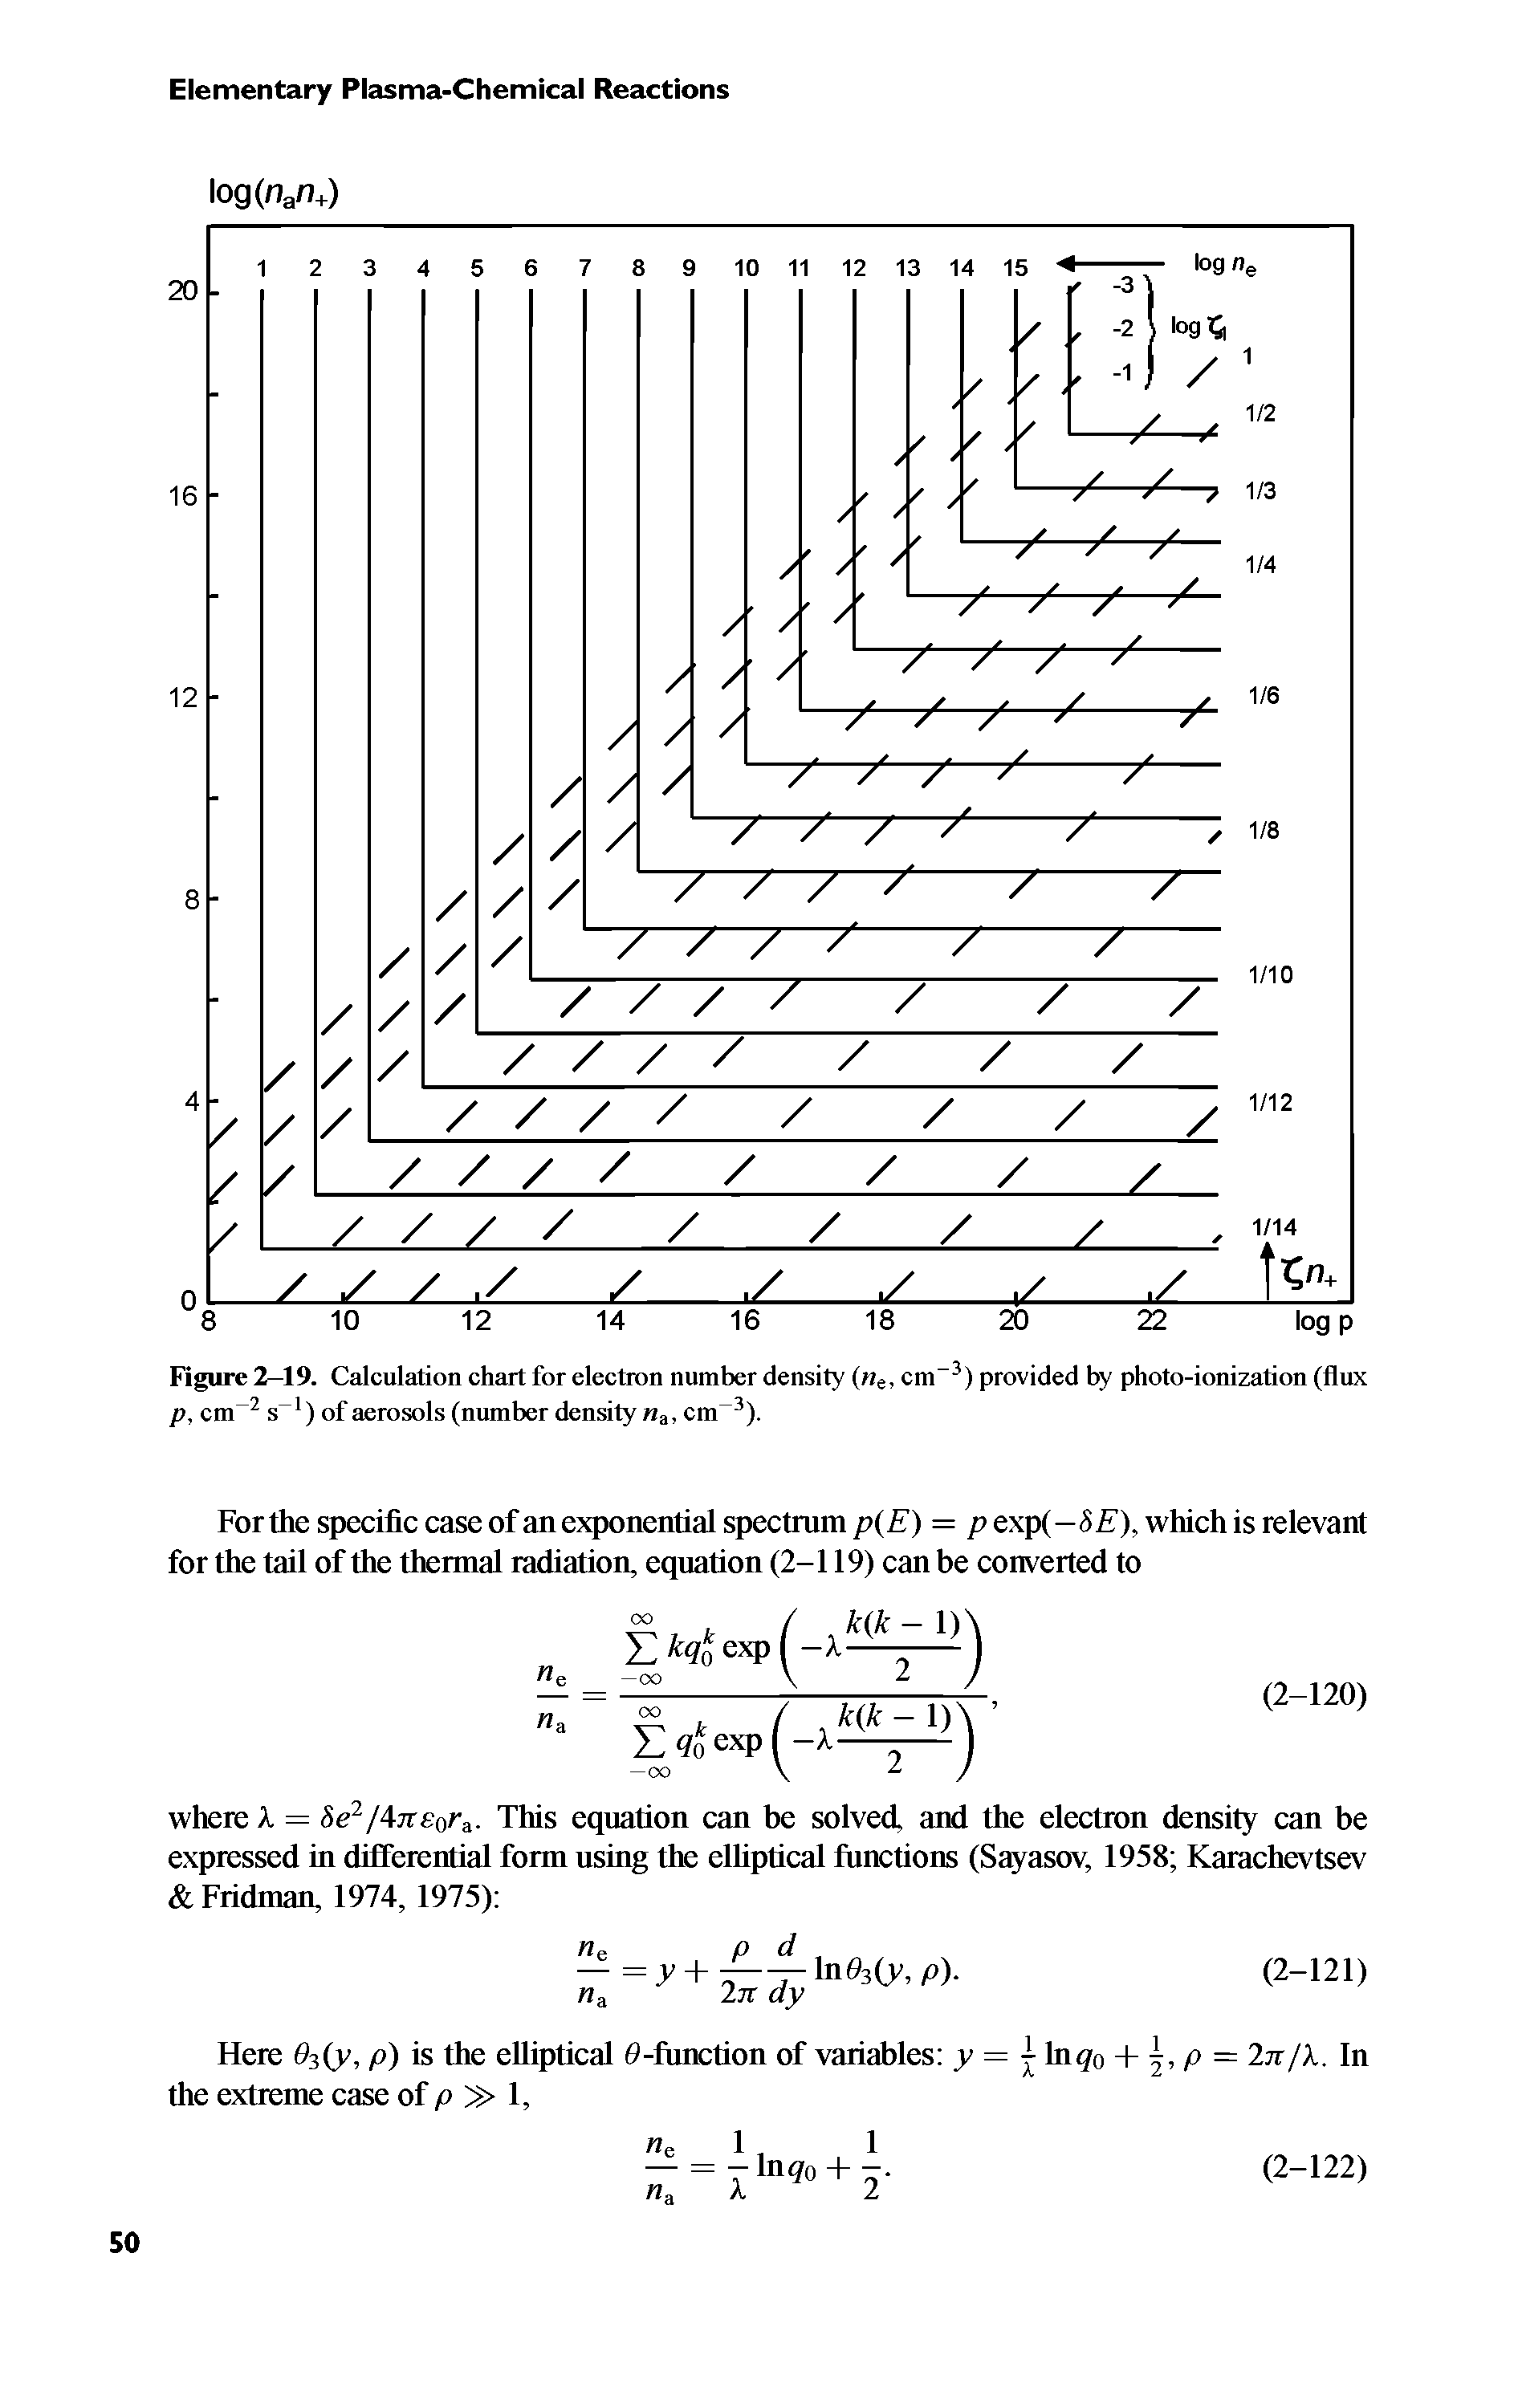 Figure 2-19. Calculation chart for electron number density ( e. cm provided by photo-ionization (flux p, cm s ) of aerosols (number density a, cm ).